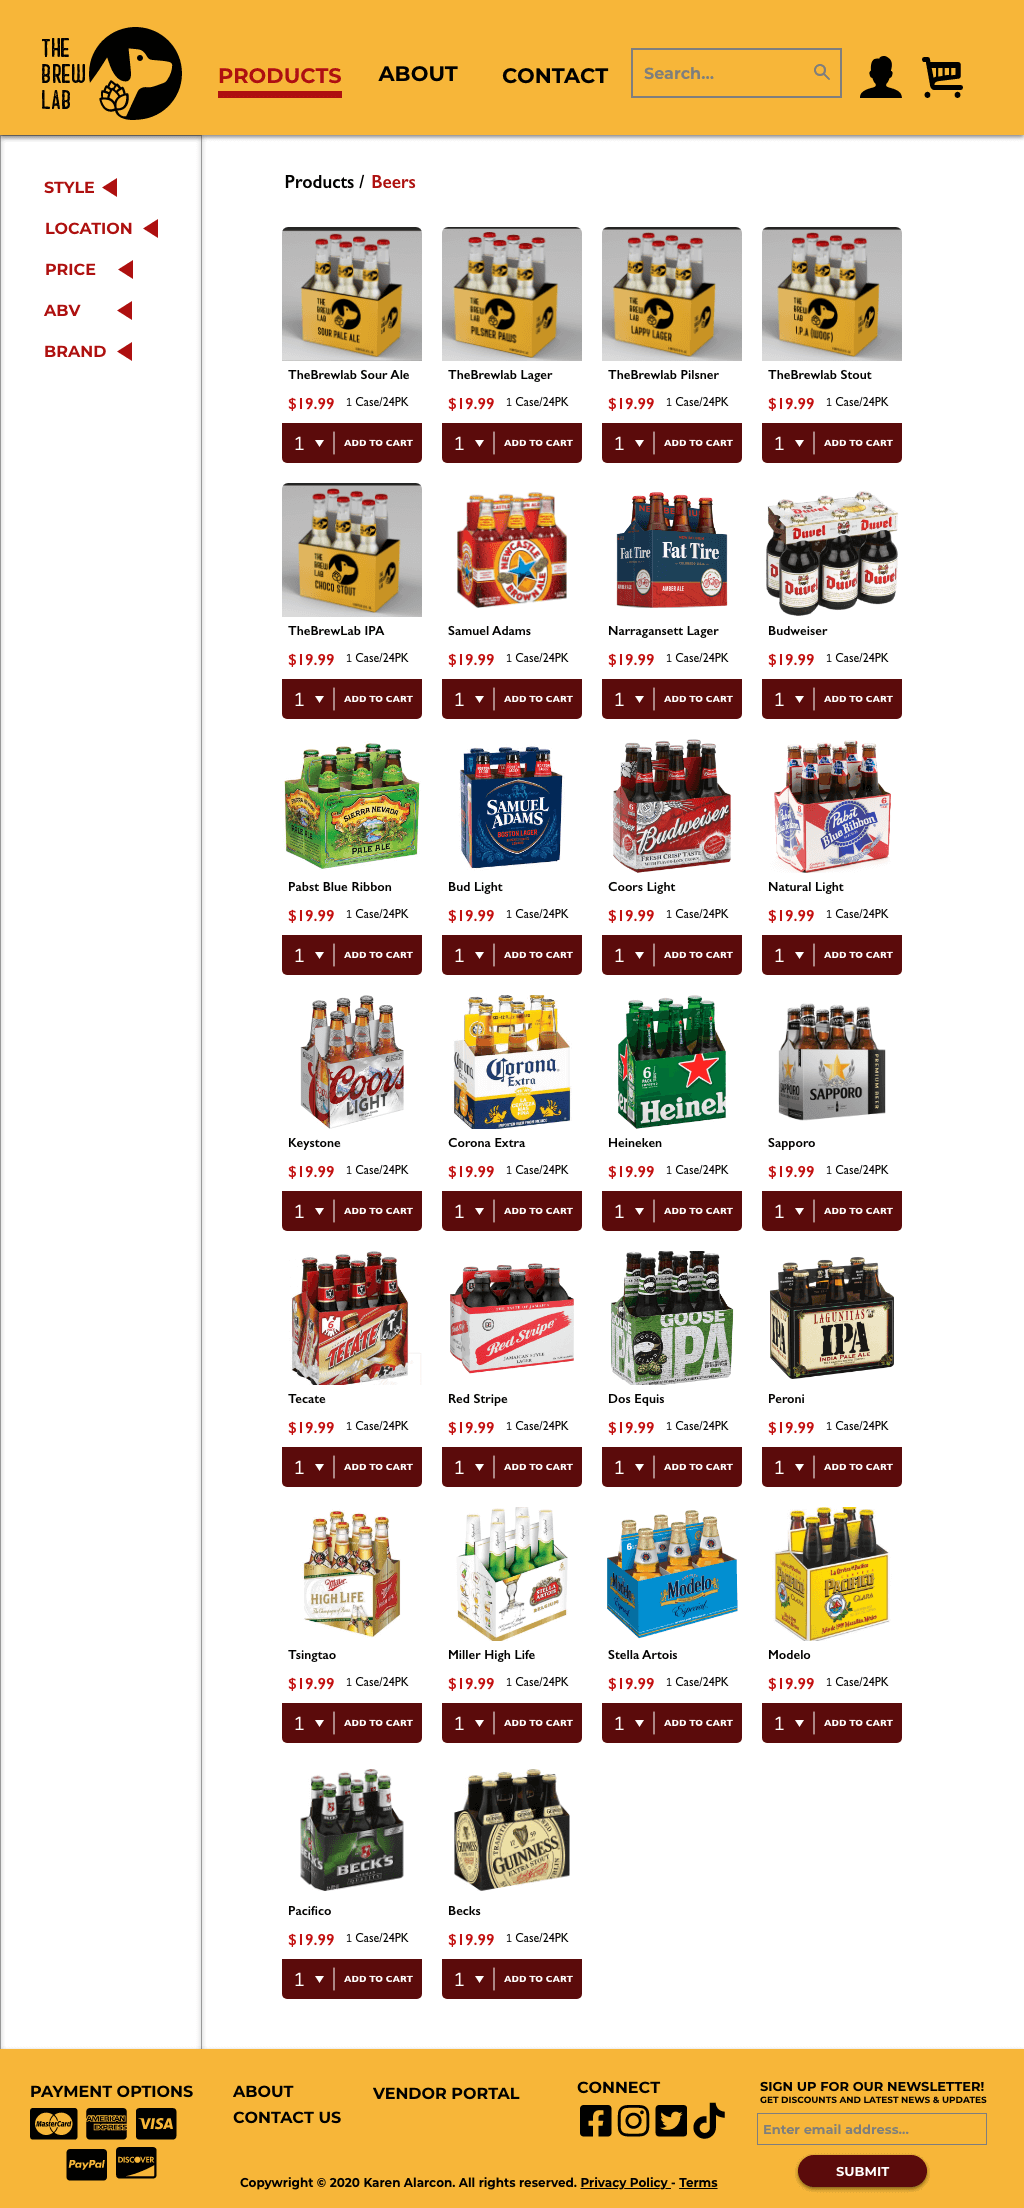 TBL Product Page List - All Beers